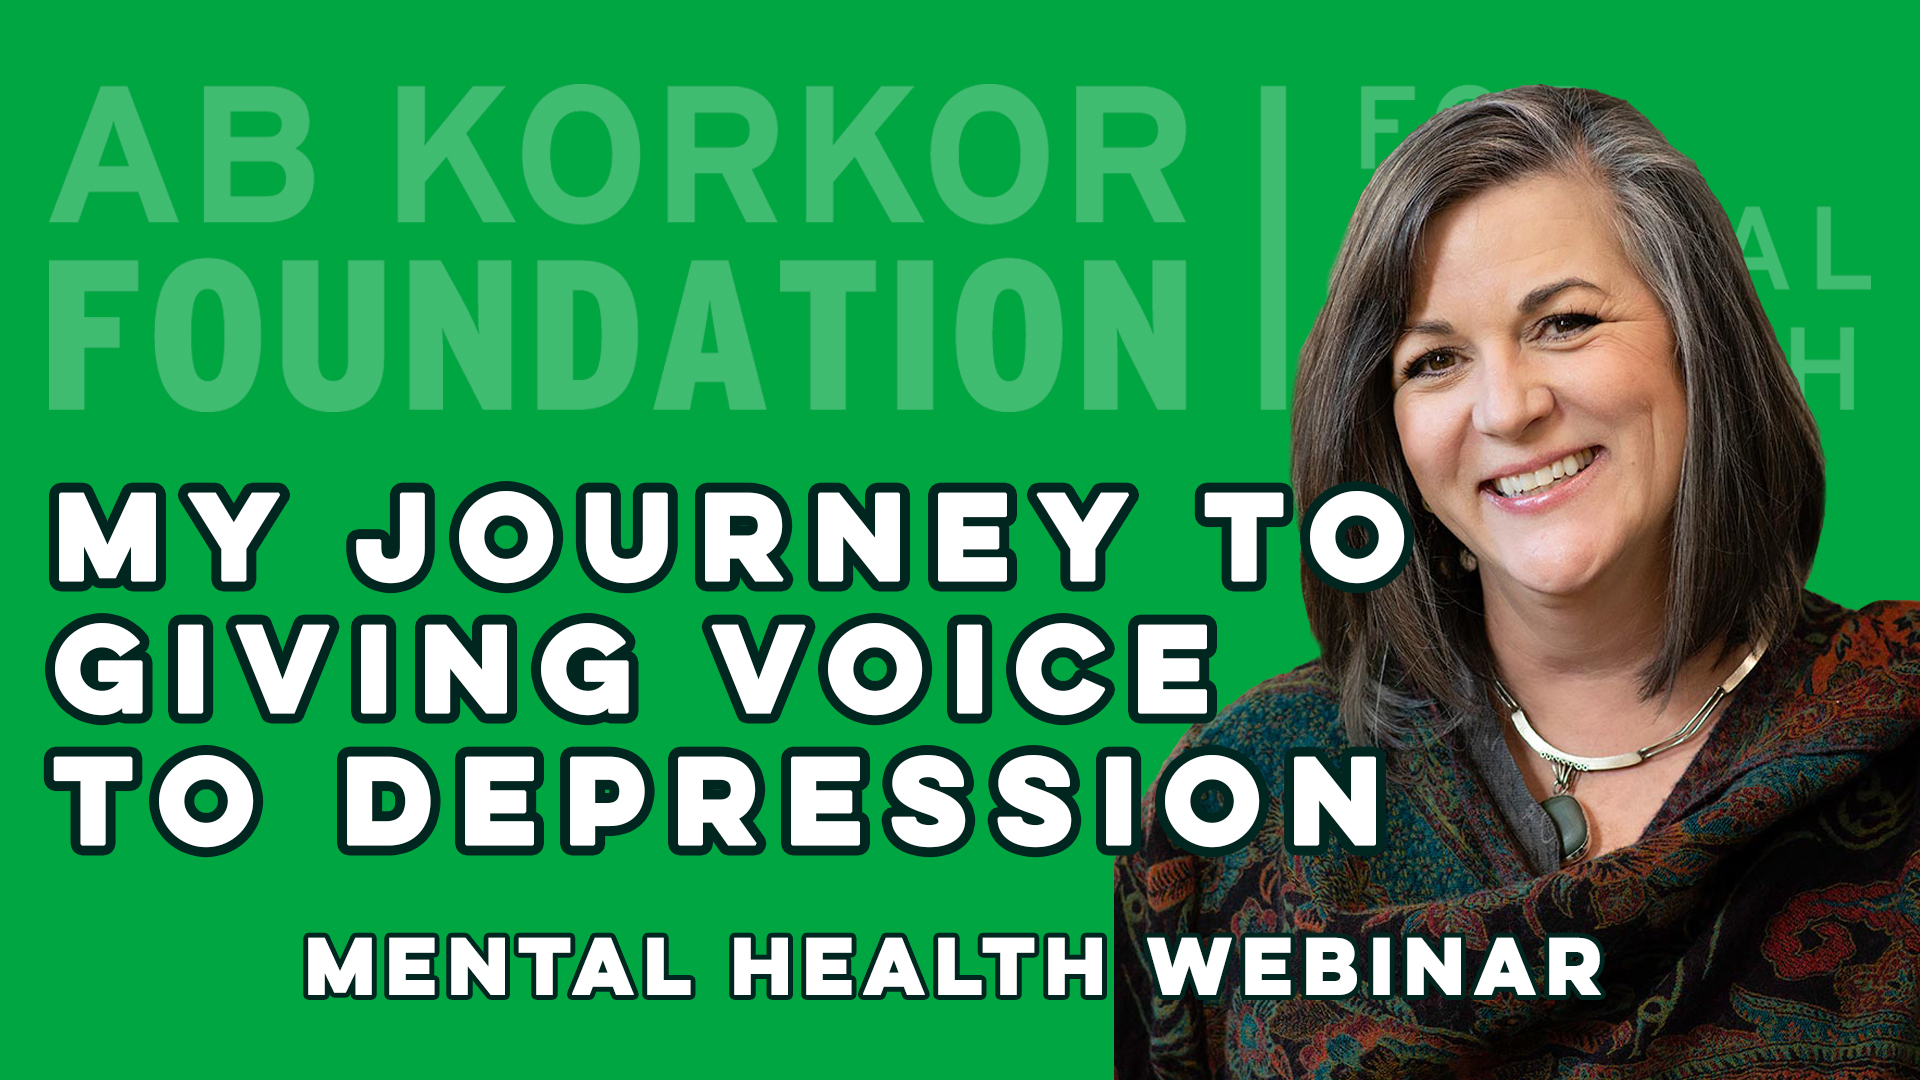 My Journey to Giving Voice to Depression - Terry McGuire - Mental Health Webinar